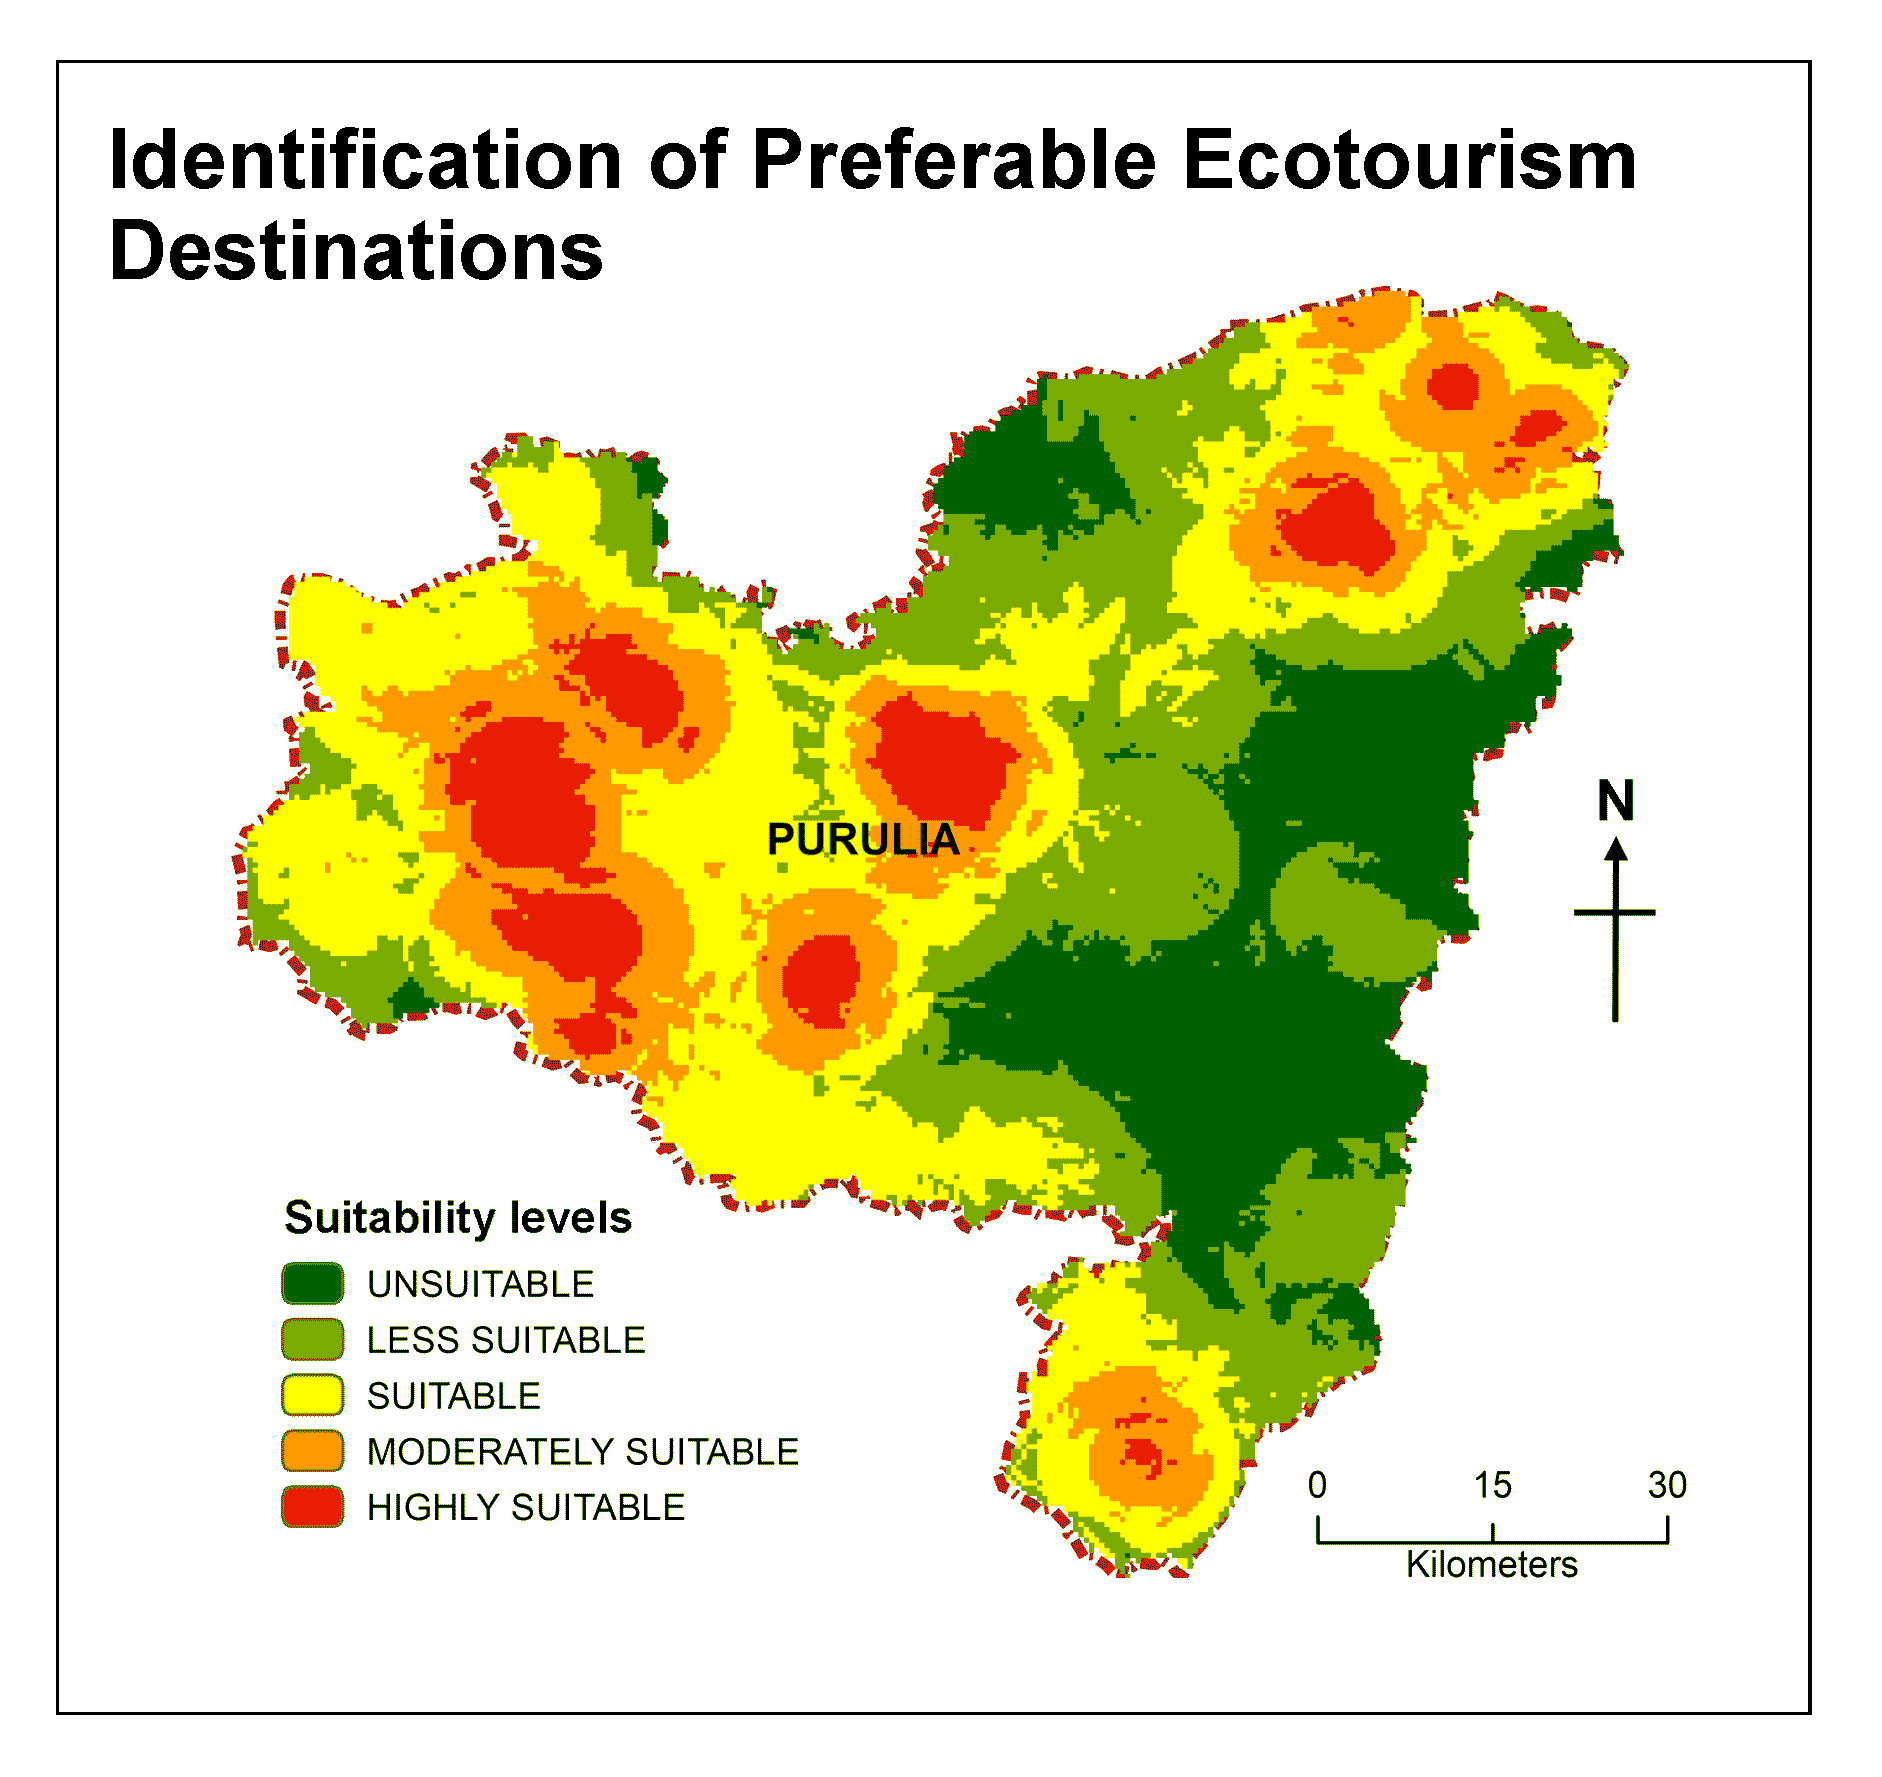 Identification of Preferable Ecotourism Destinations in Purulia District, West Bengal (India): AHP and GIS Approach